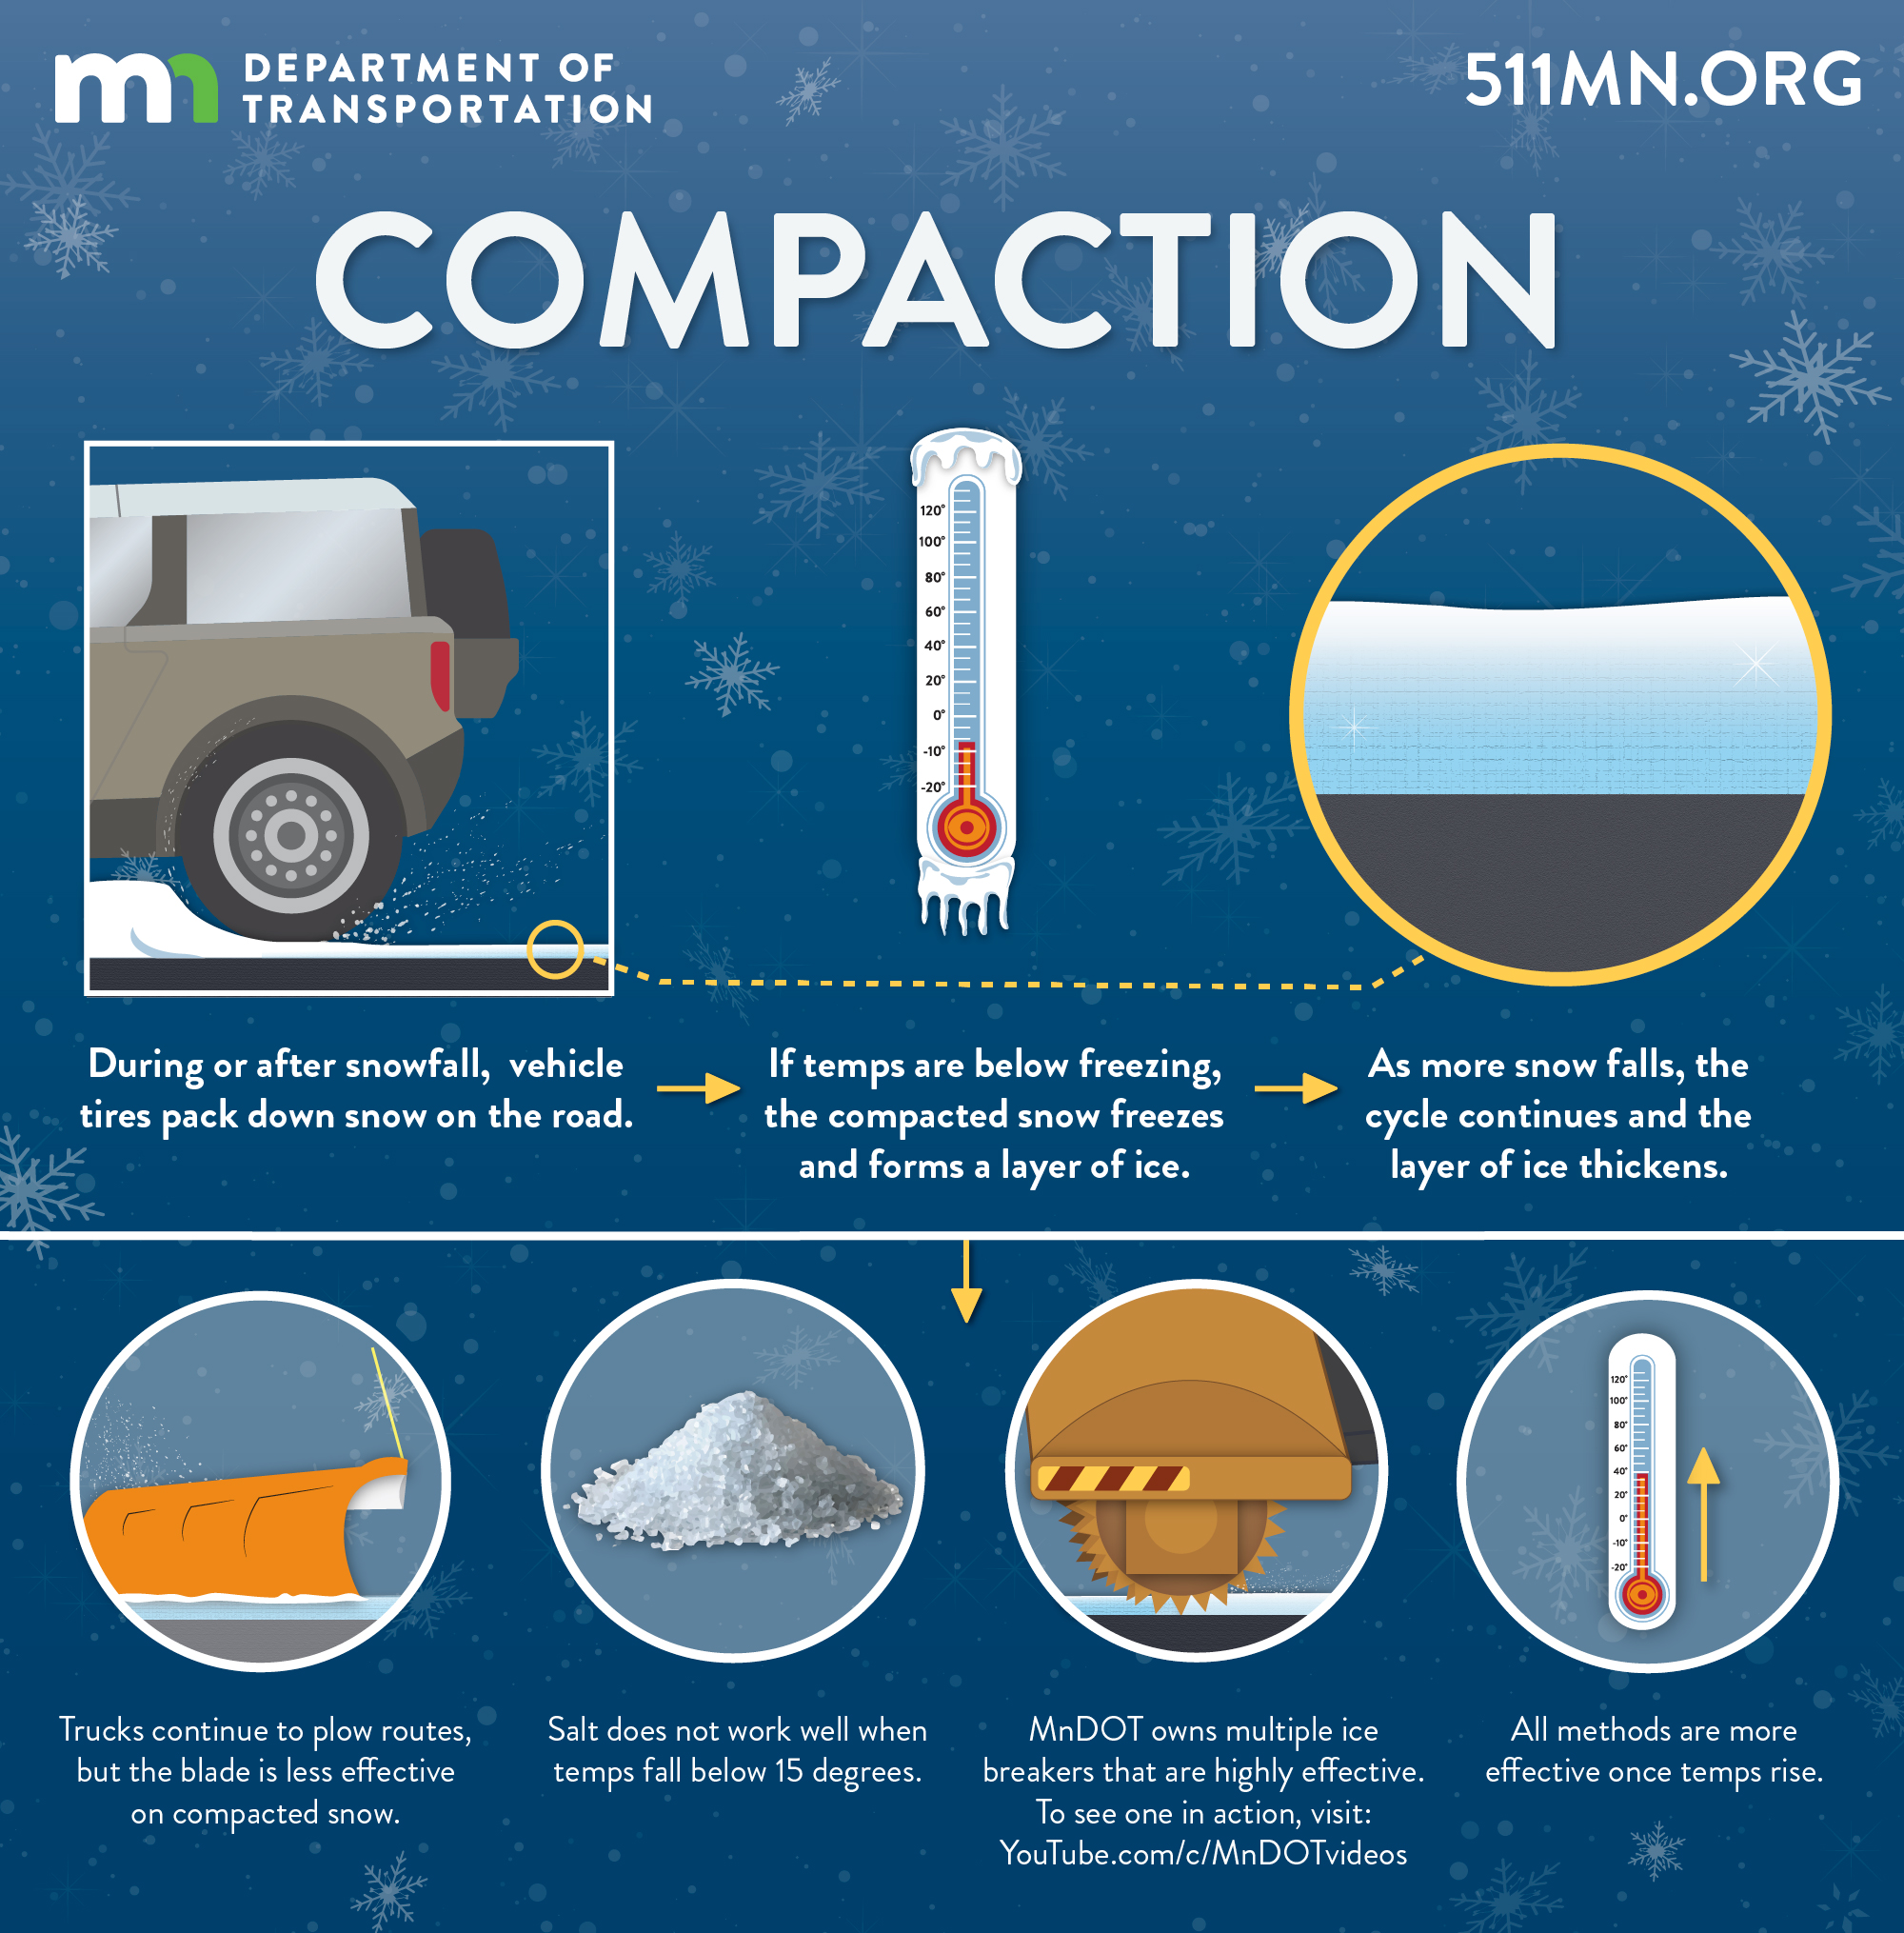 During or after snowfall, vehicle tires pack down snow on the road. If temperatures are below freezing, the compacted snow refreezes and forms a layer of ice and as more snow falls, the layer of ice thickens. Salt does not work well when temperatures fall below 15 degrees, so MnDOT owns ice breakers that help break up compacted snow.